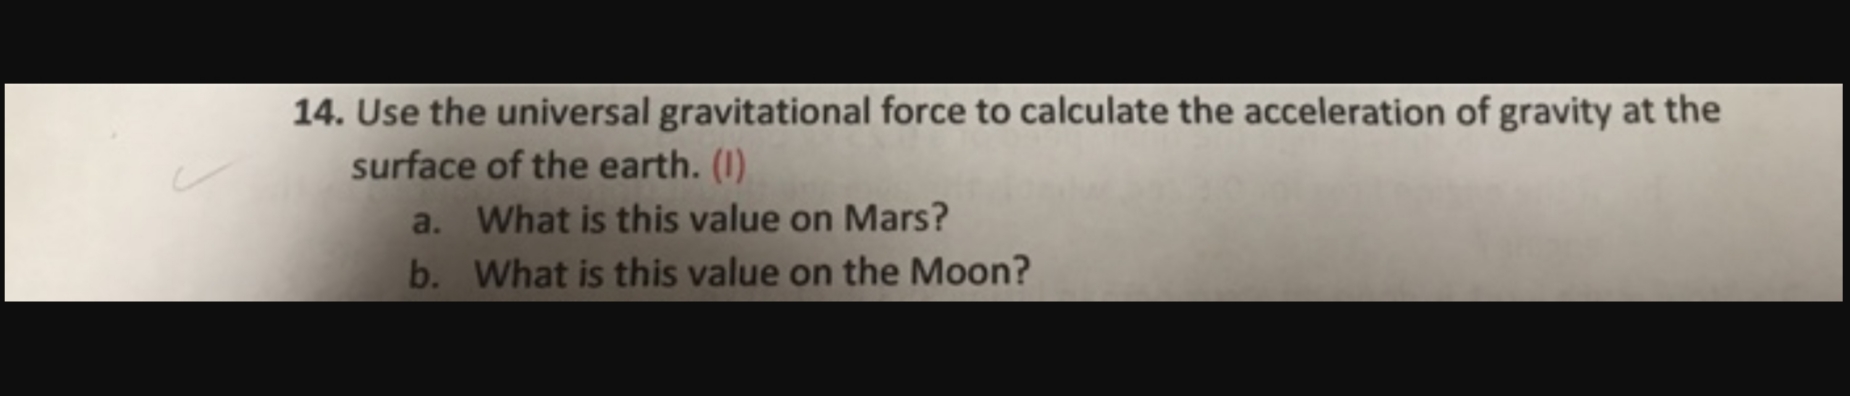 14. Use the universal gravitational force to calculate the acceleration of gravity at the
surface of the earth. (I)
a. What is this value on Mars?
b. What is this value on the Moon?
